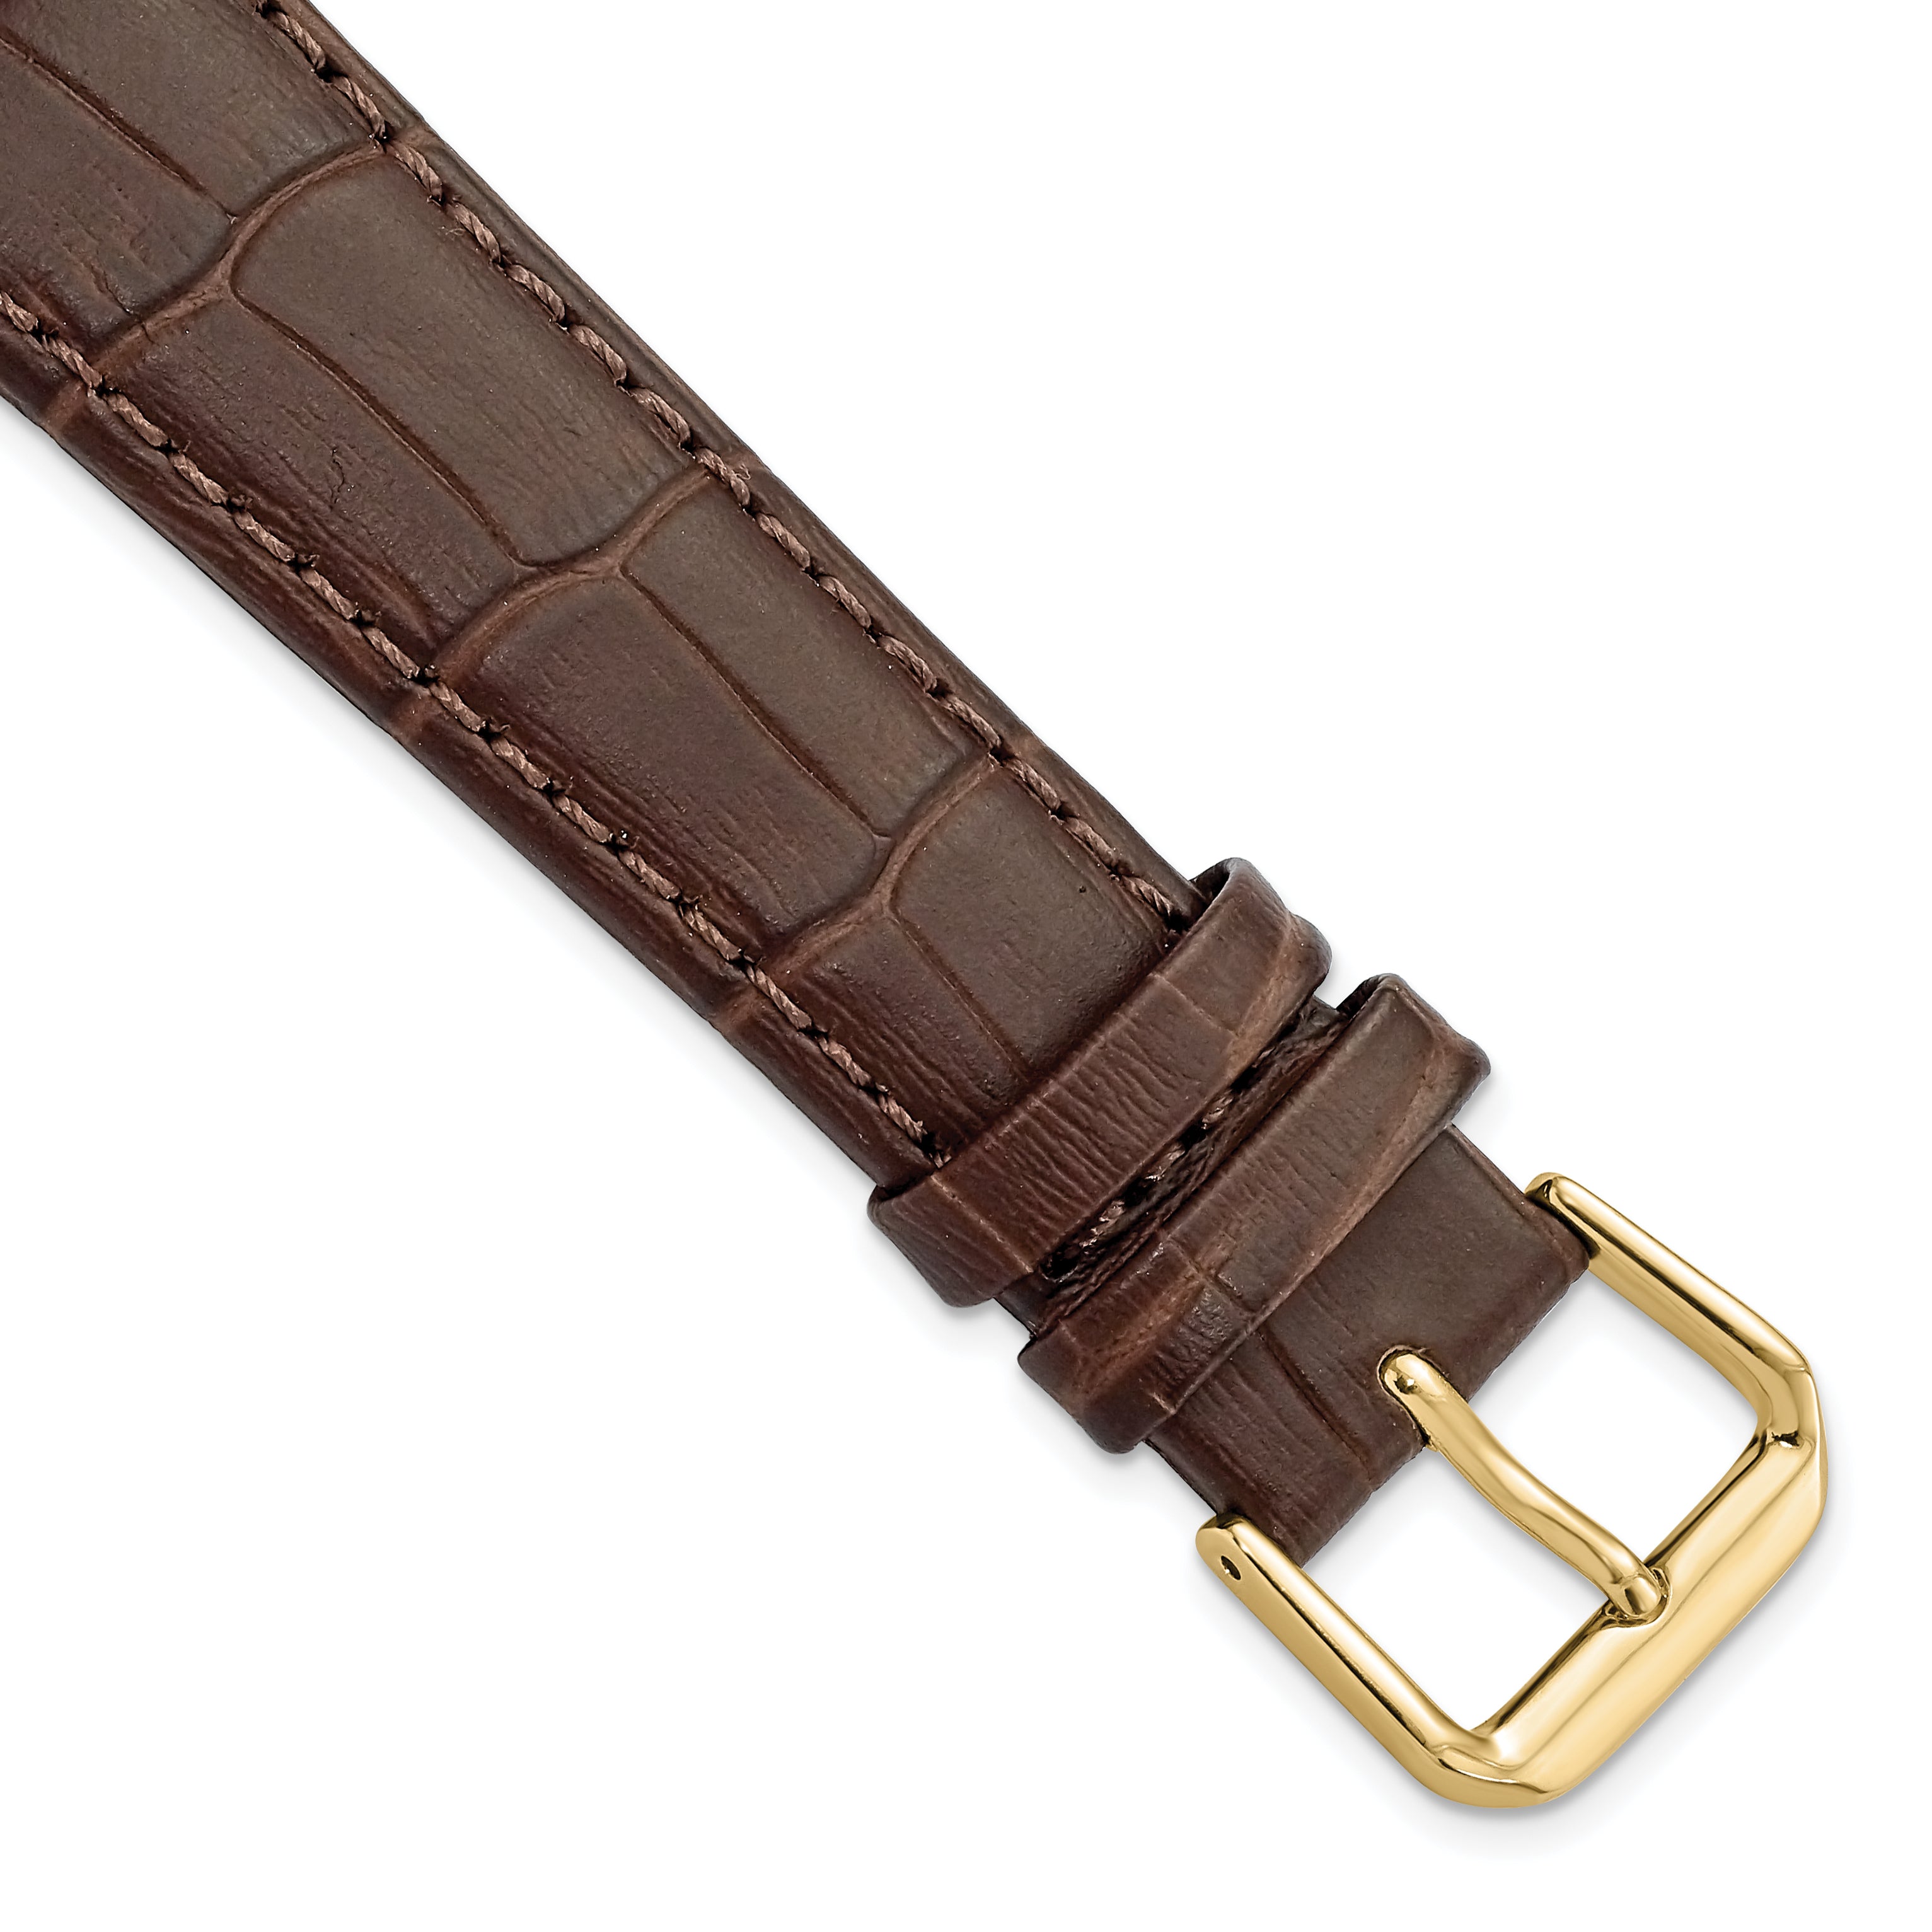 DeBeer 19mm Brown Matte Wild Alligator Grain Leather with Gold-tone Buckle 7.5 inch Watch Band